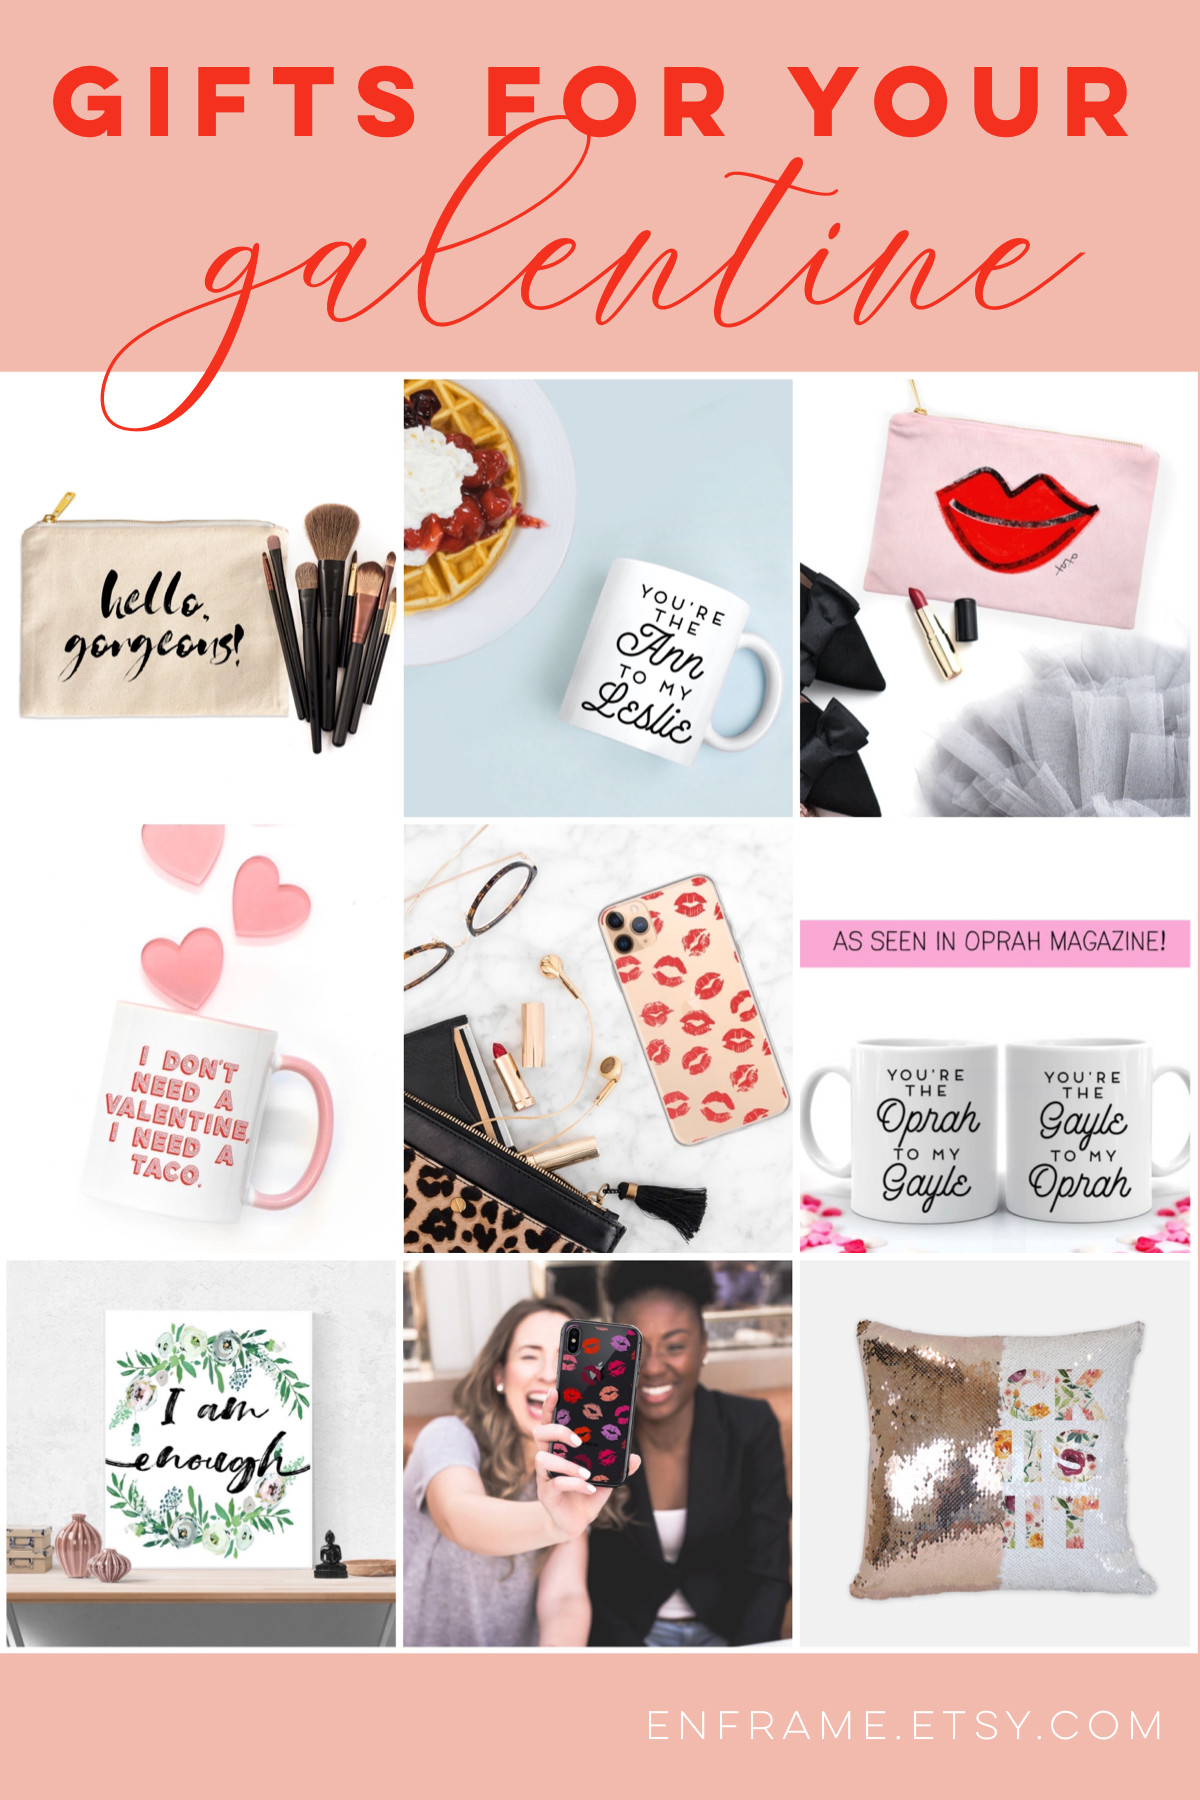 Valentine Gift Ideas 2020
 Gift Ideas for your Galentine in 2020